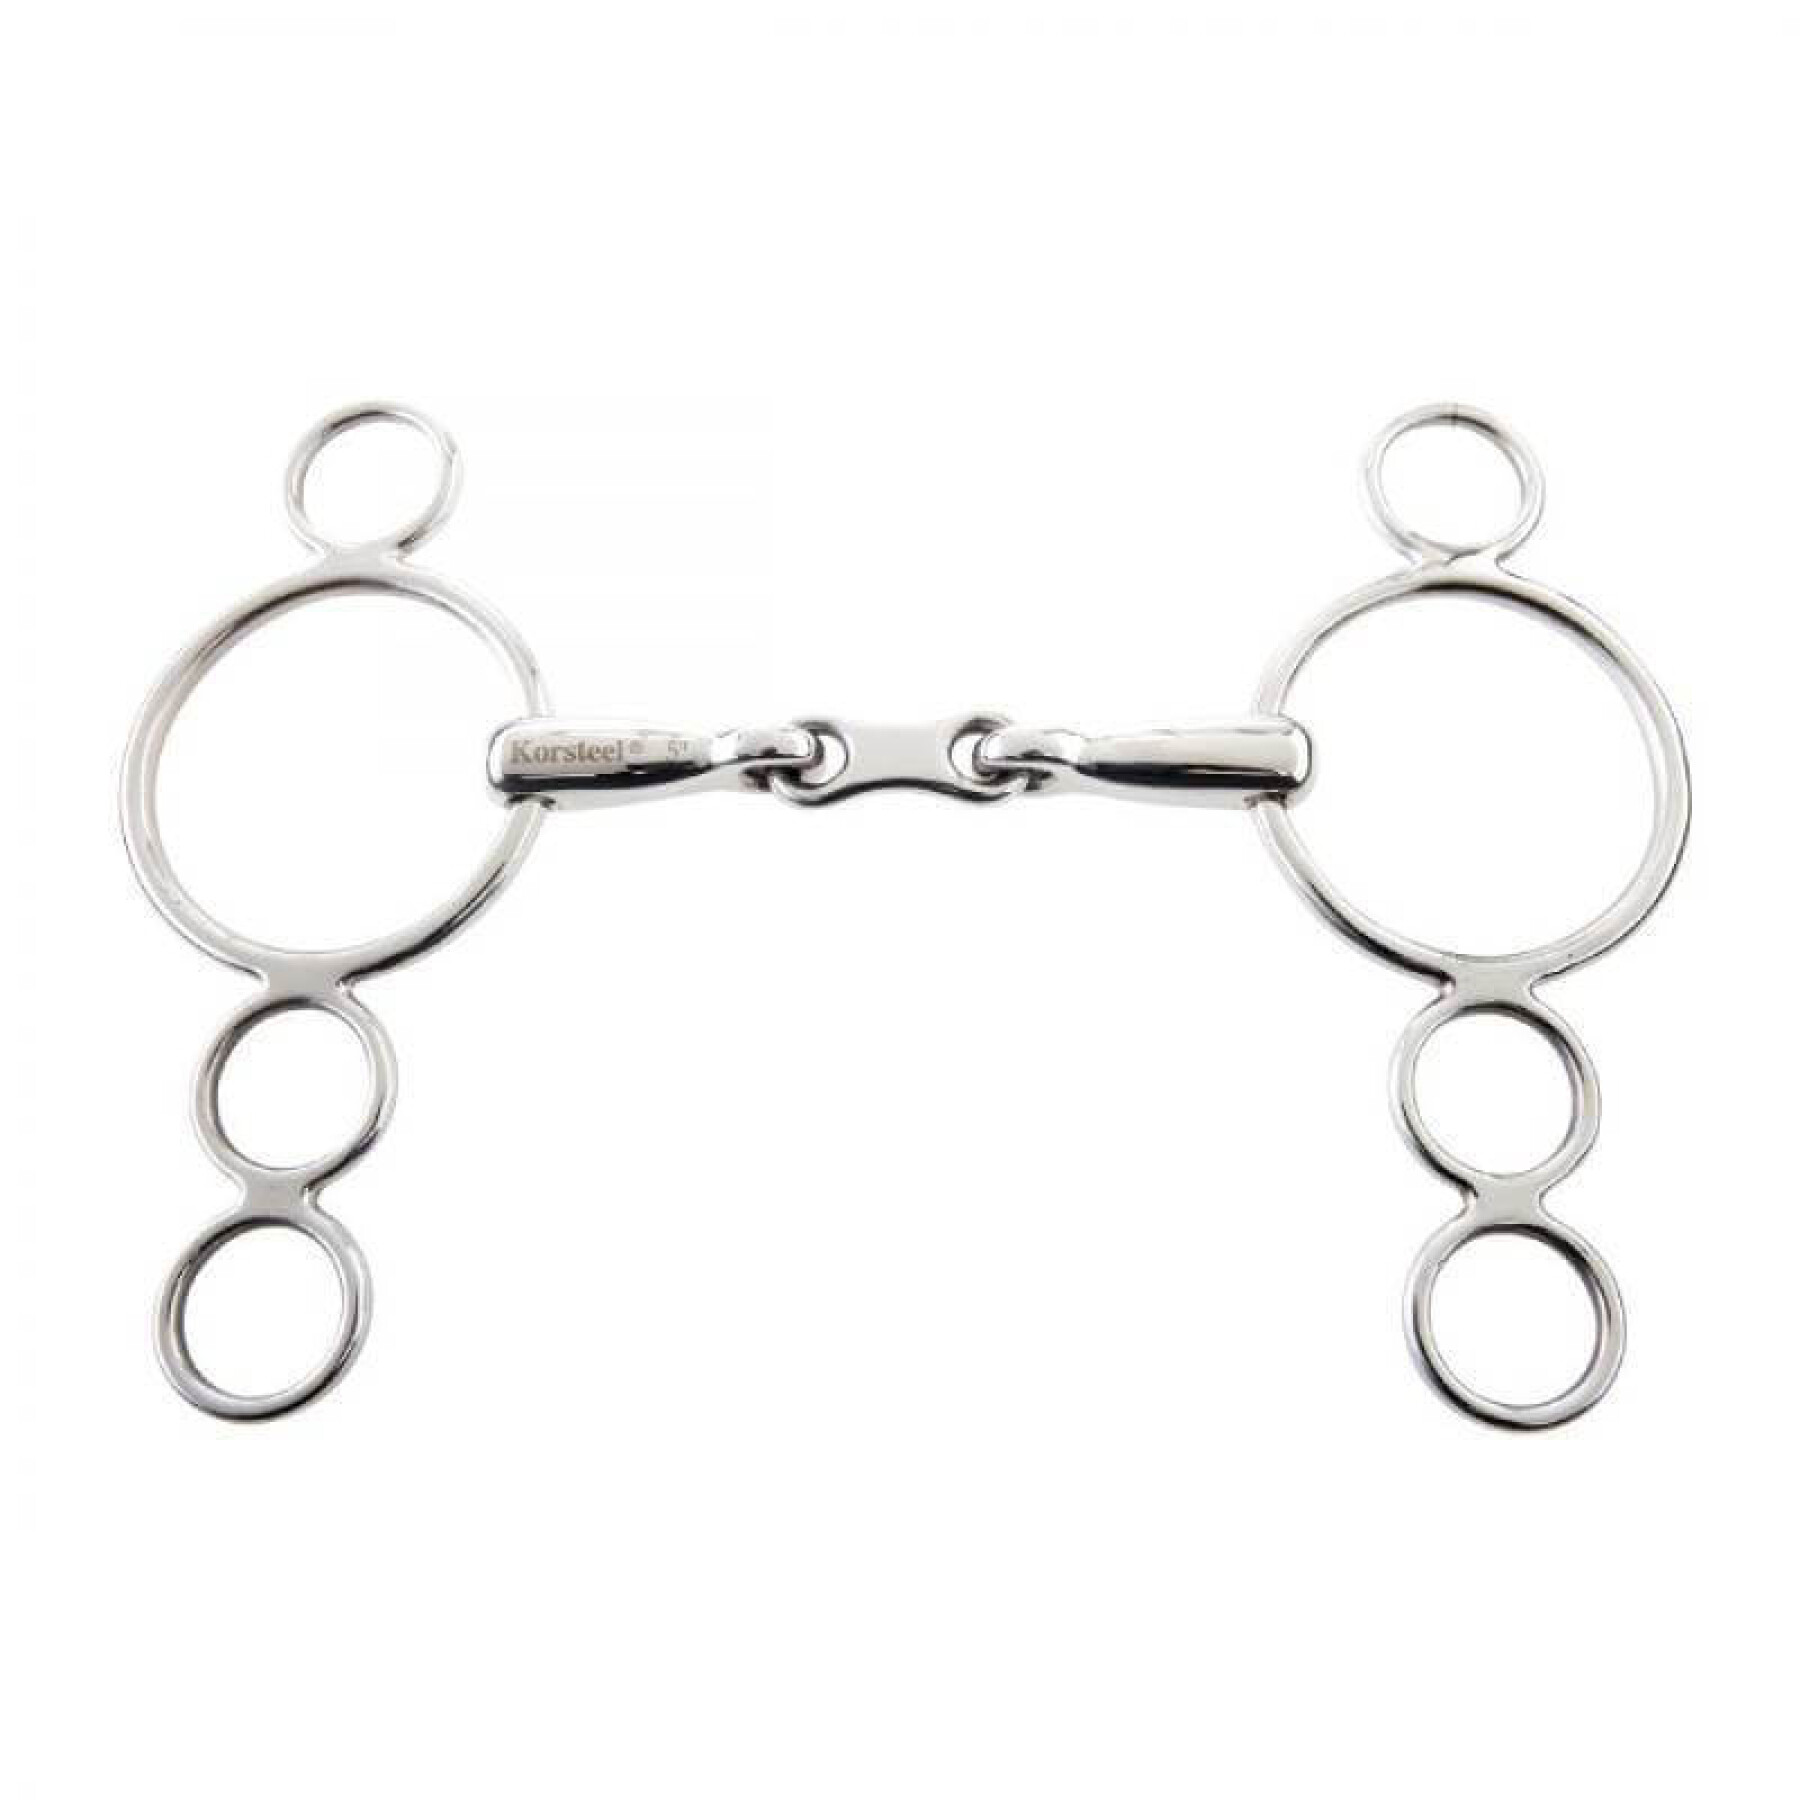 Dutch 3 ring bit with French links for horses Weatherbeeta Korsteel